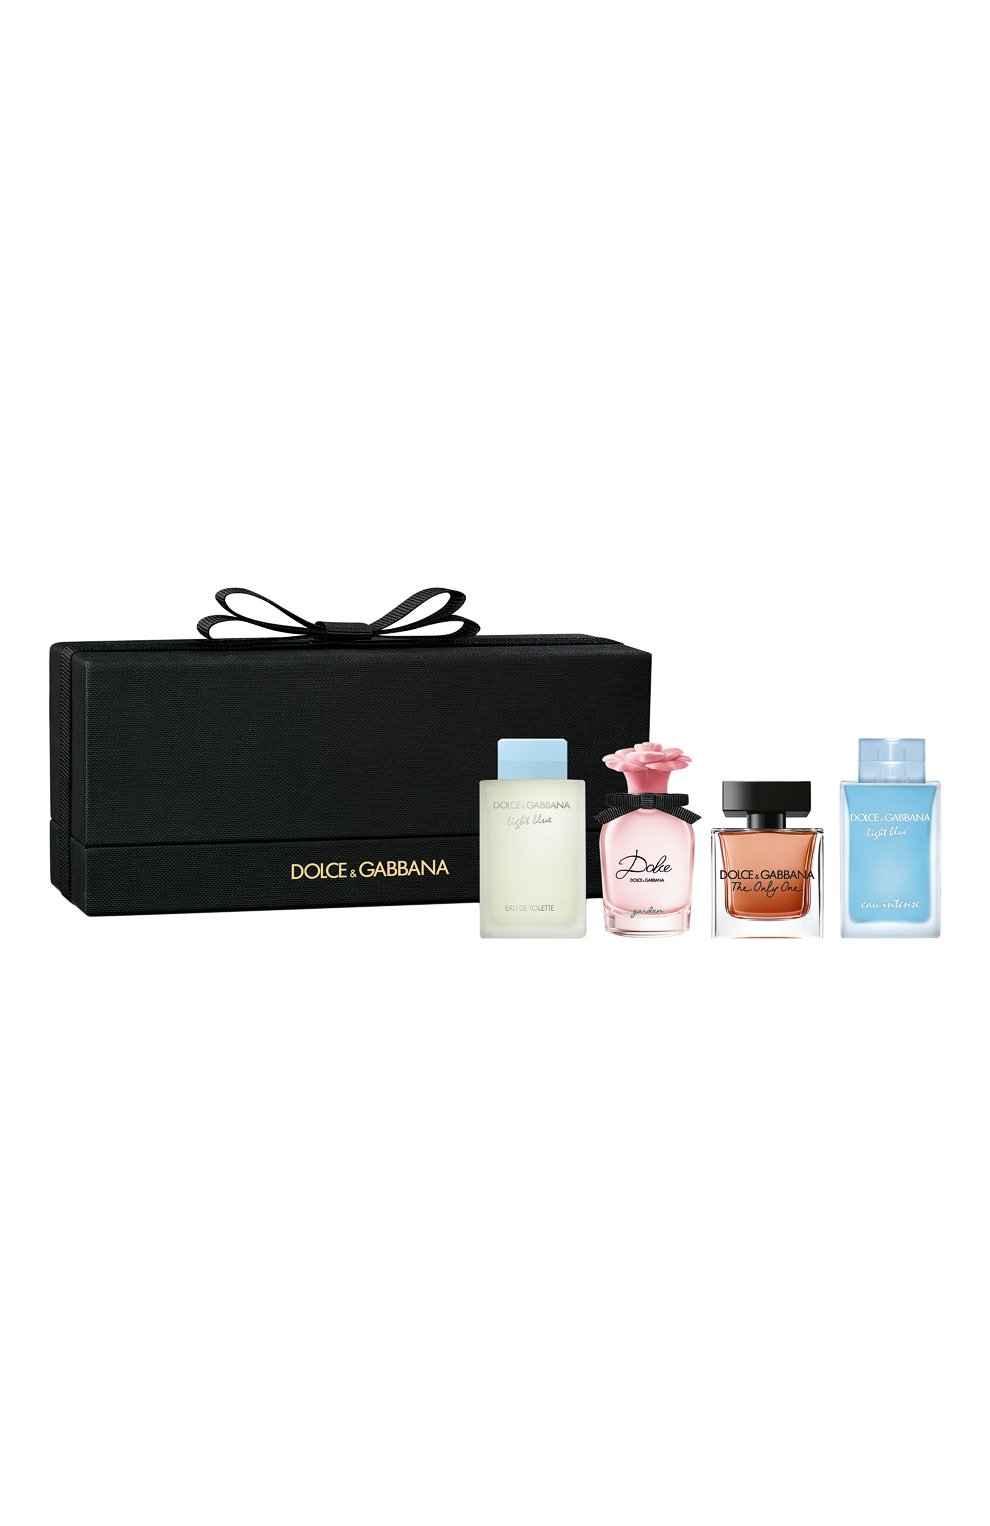 dolce and gabbana cologne gift set